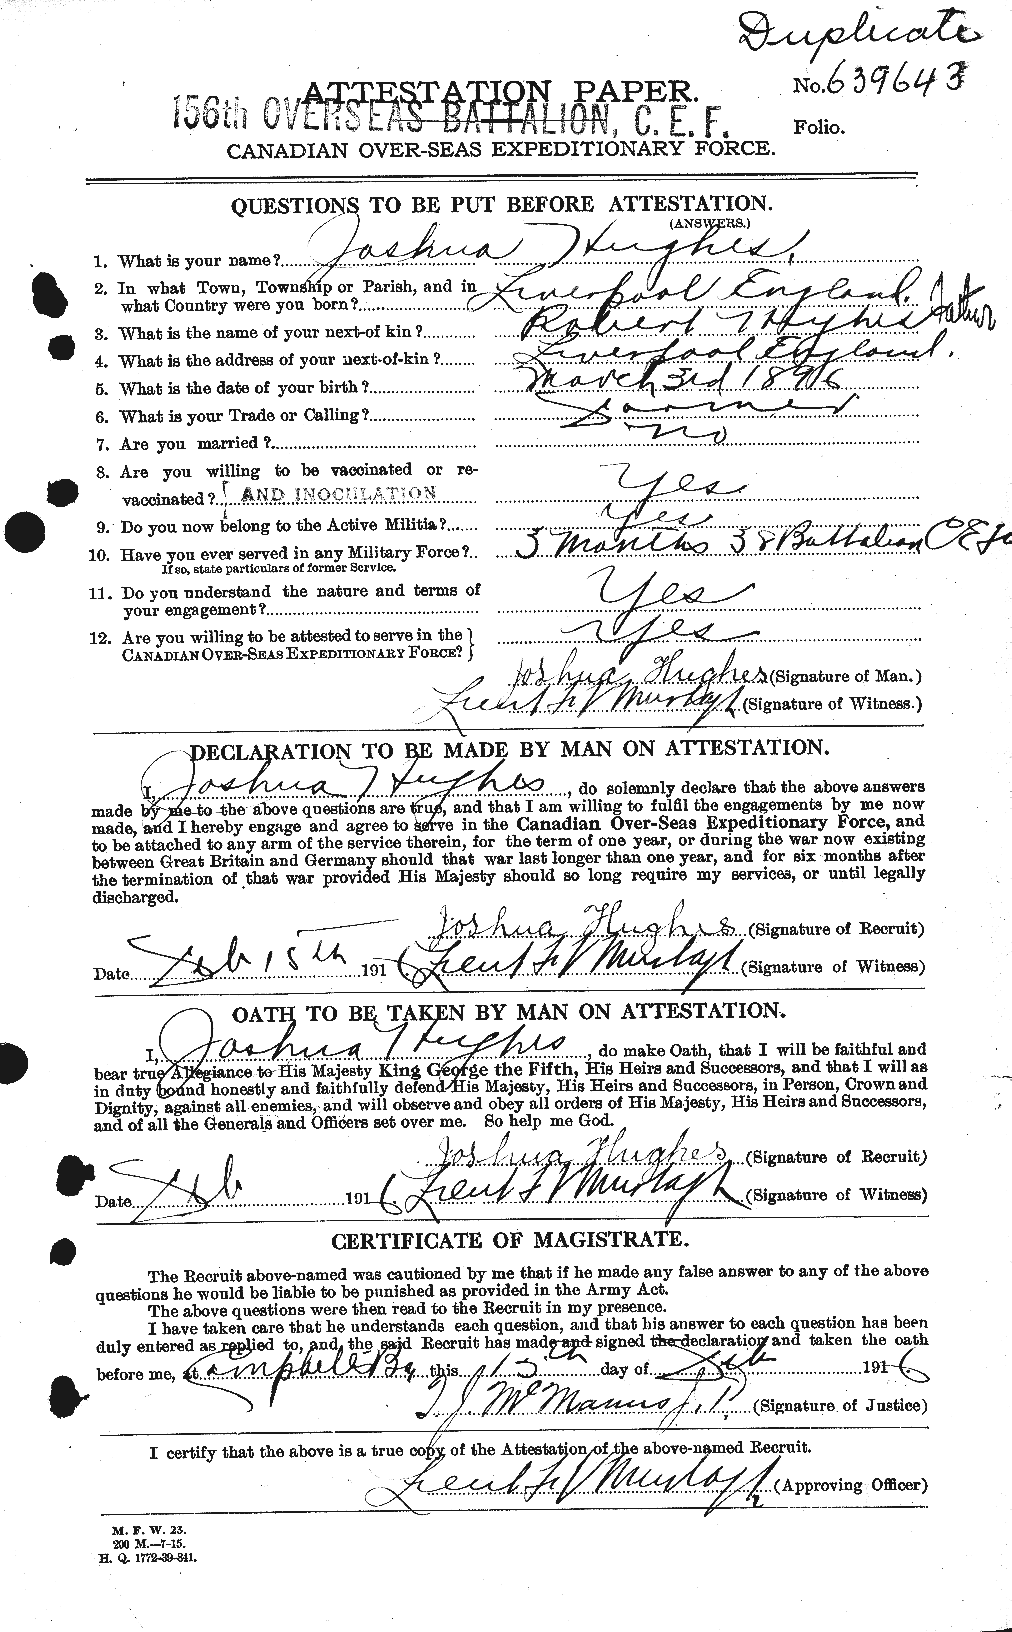 Personnel Records of the First World War - CEF 404090a